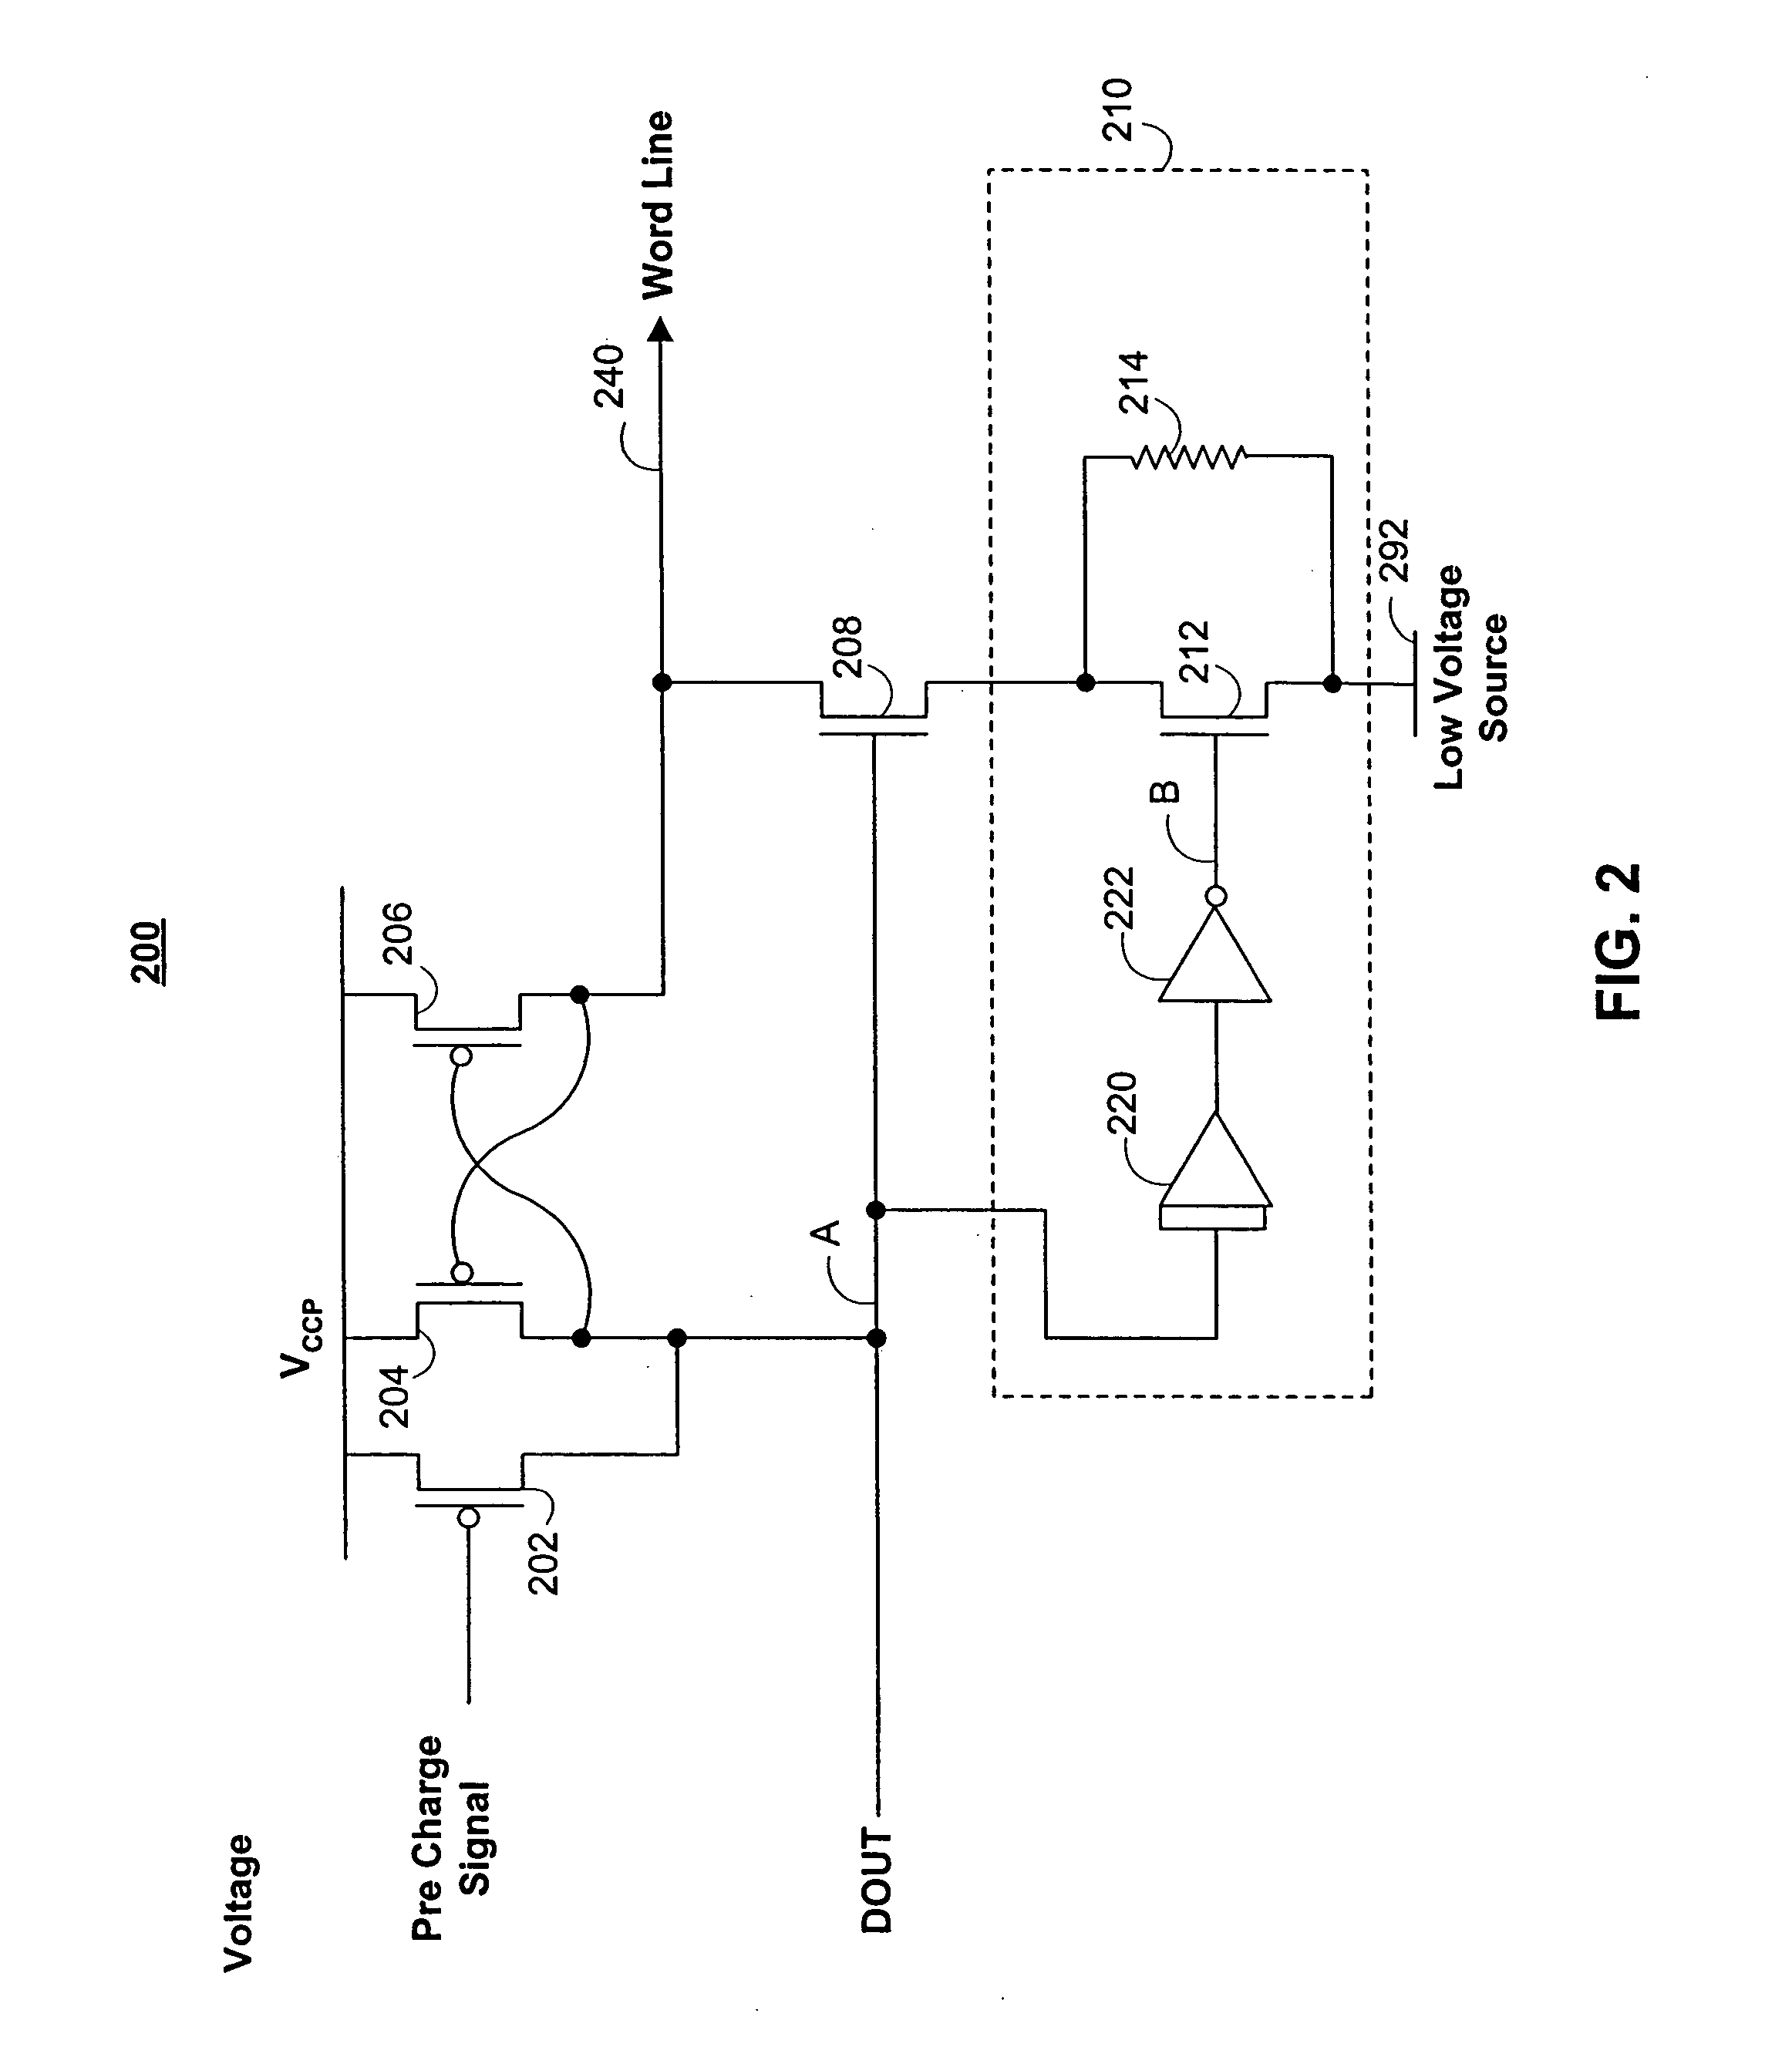 Word line driver circuitry and methods for using the same